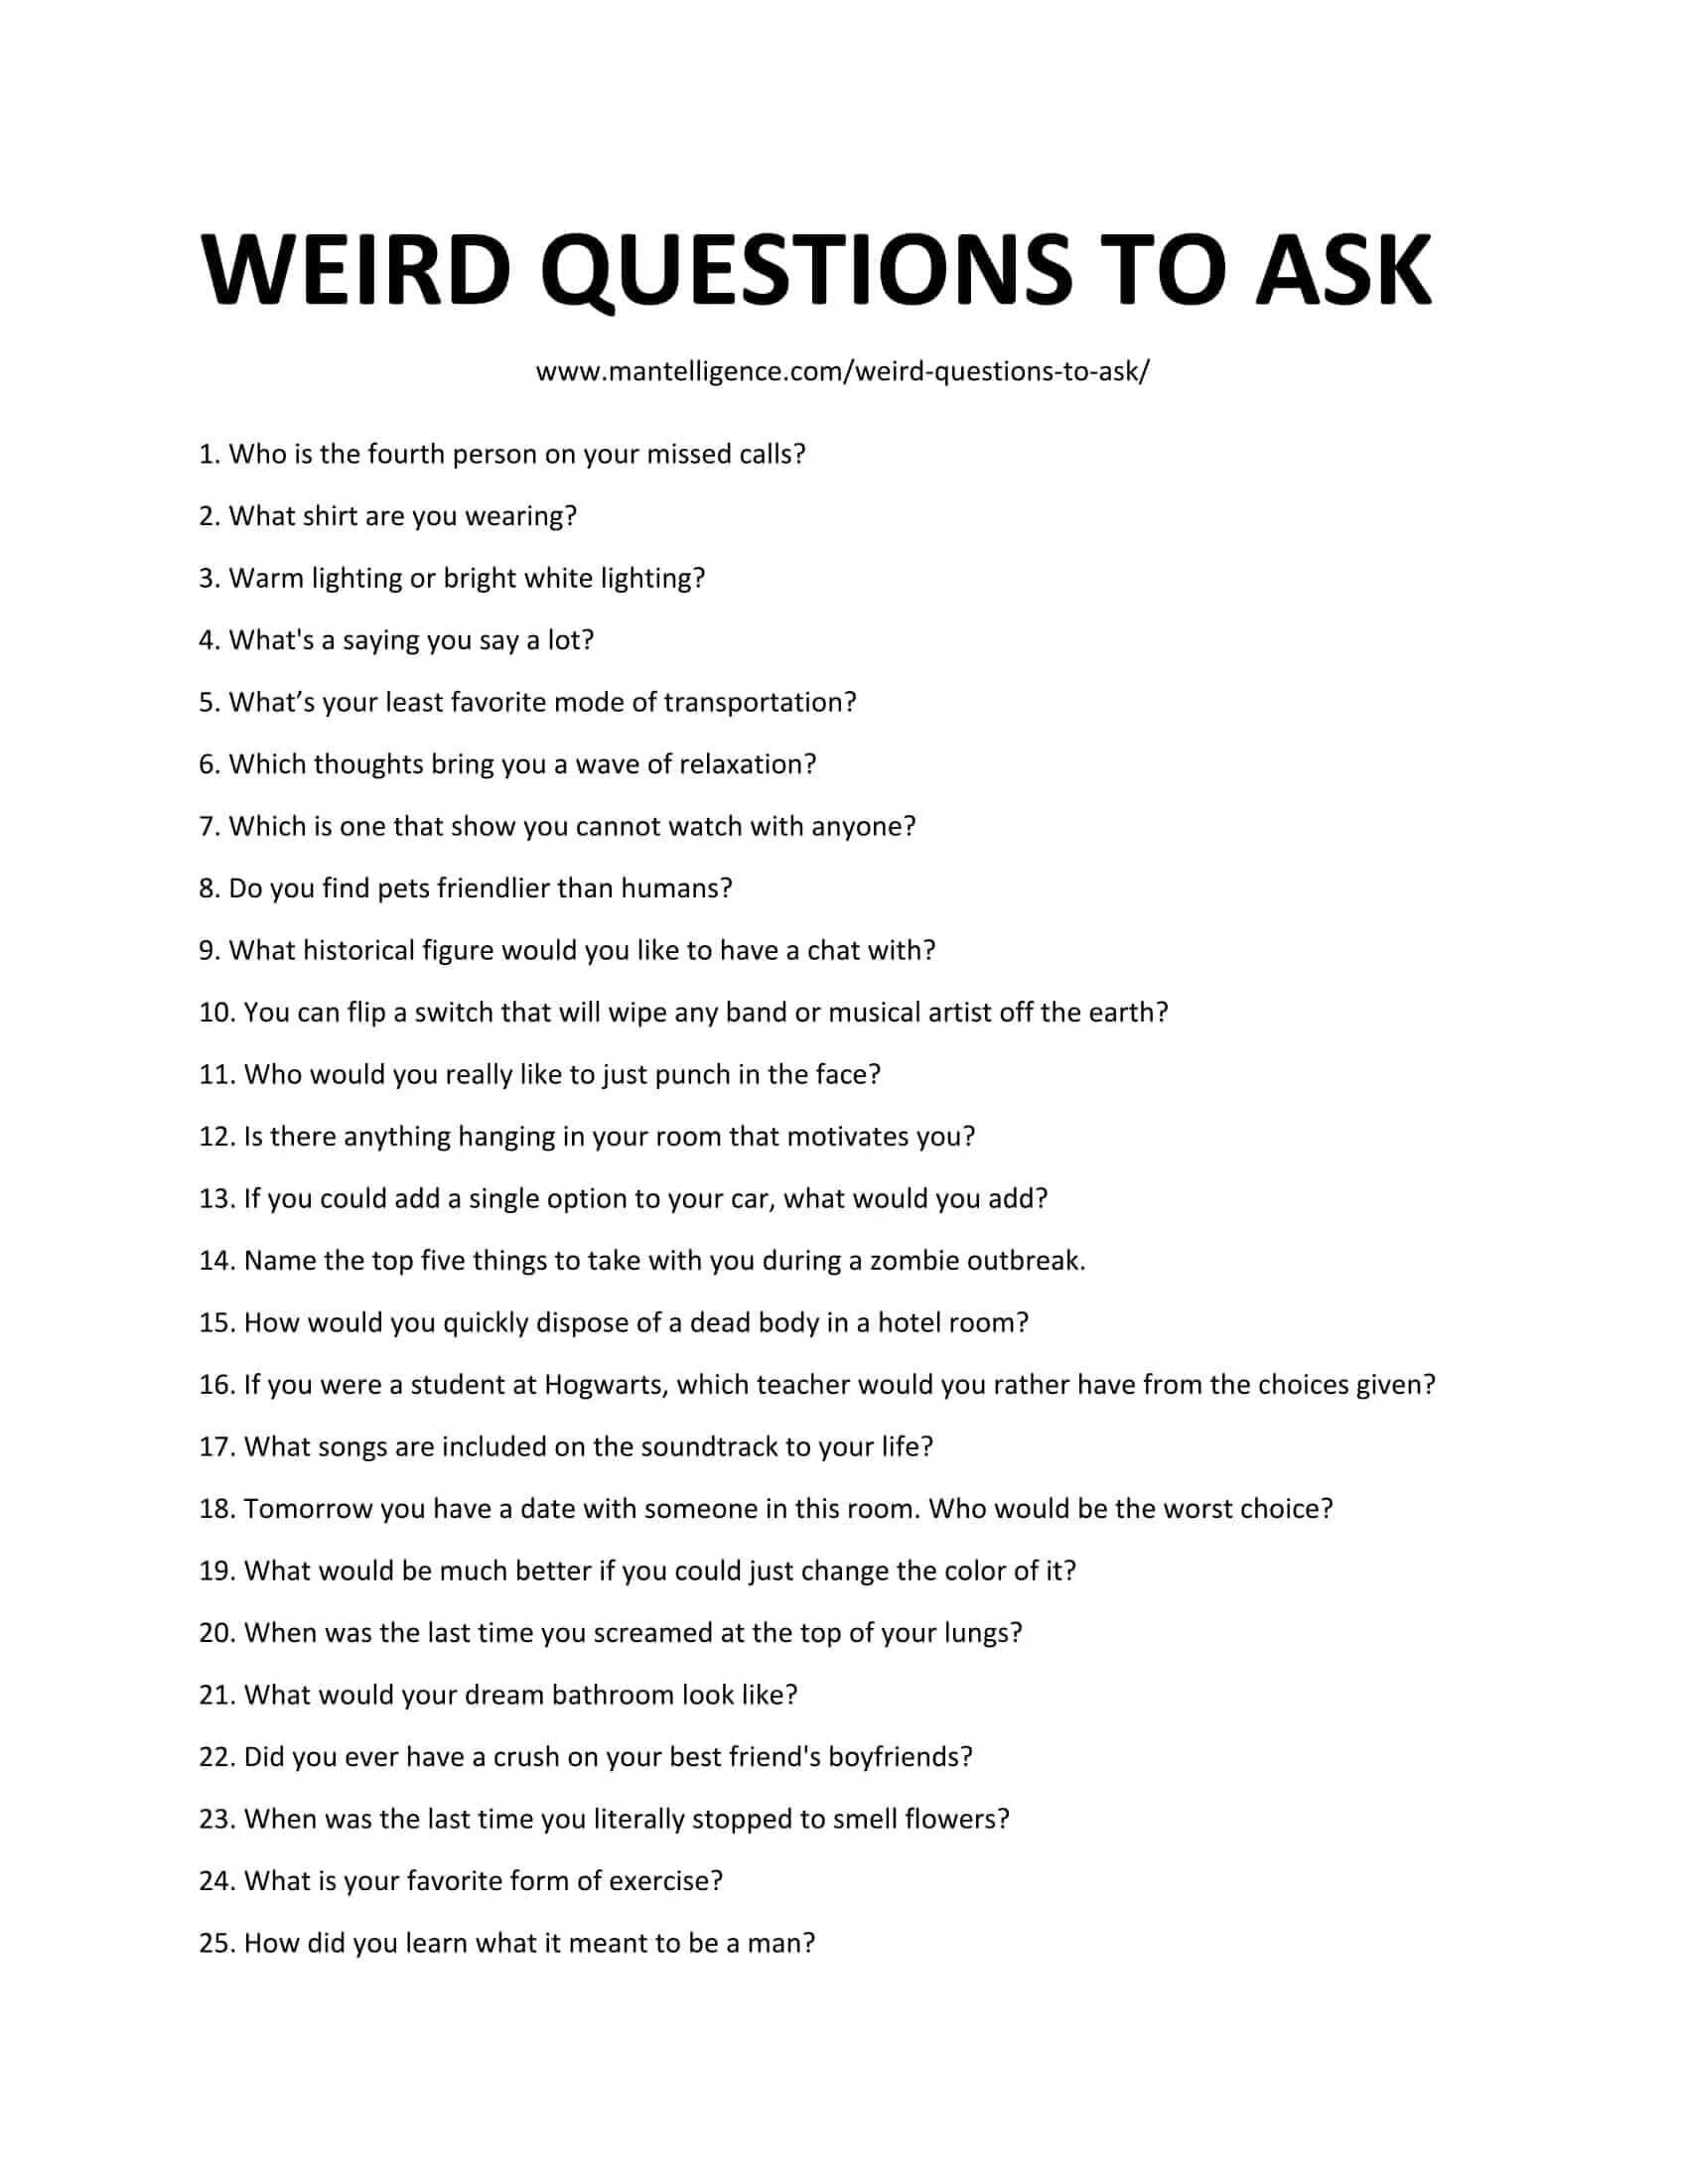 Top questions. Weird questions to ask. Questions to ask. Questions to ask a New person. Interesting questions to ask.